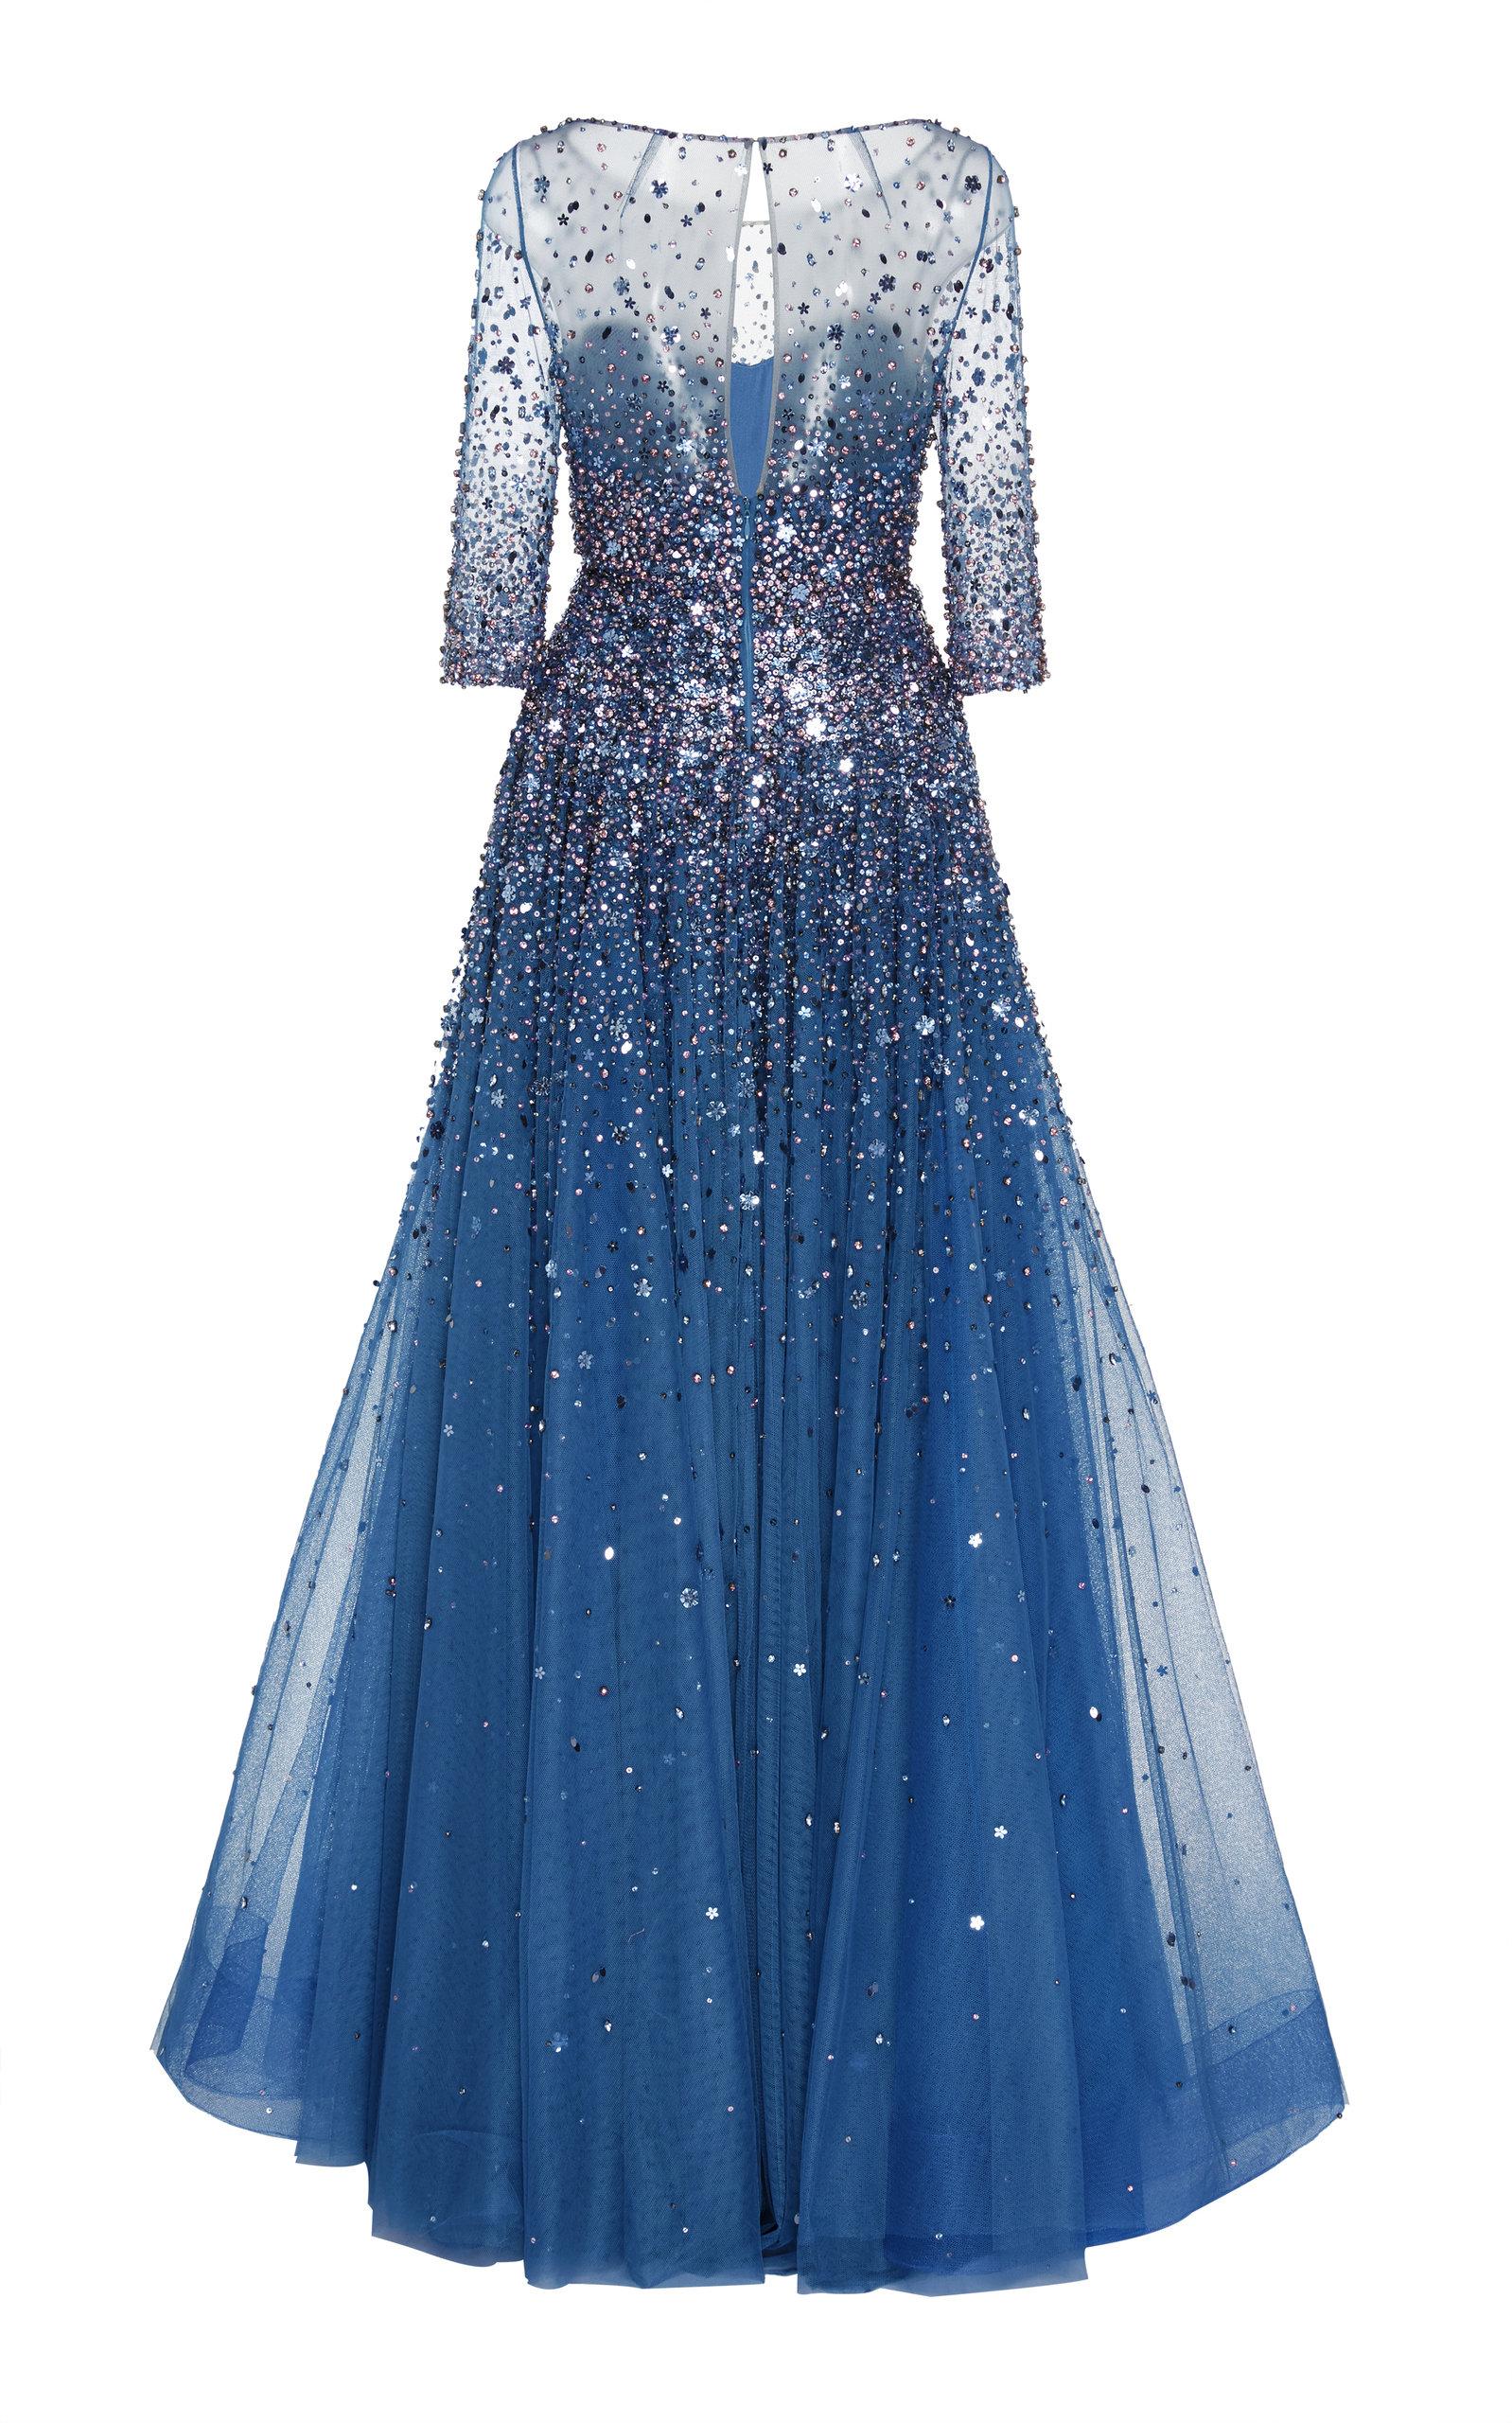 Jenny Packham Charisse Embellished Tulle Gown in Blue - Lyst